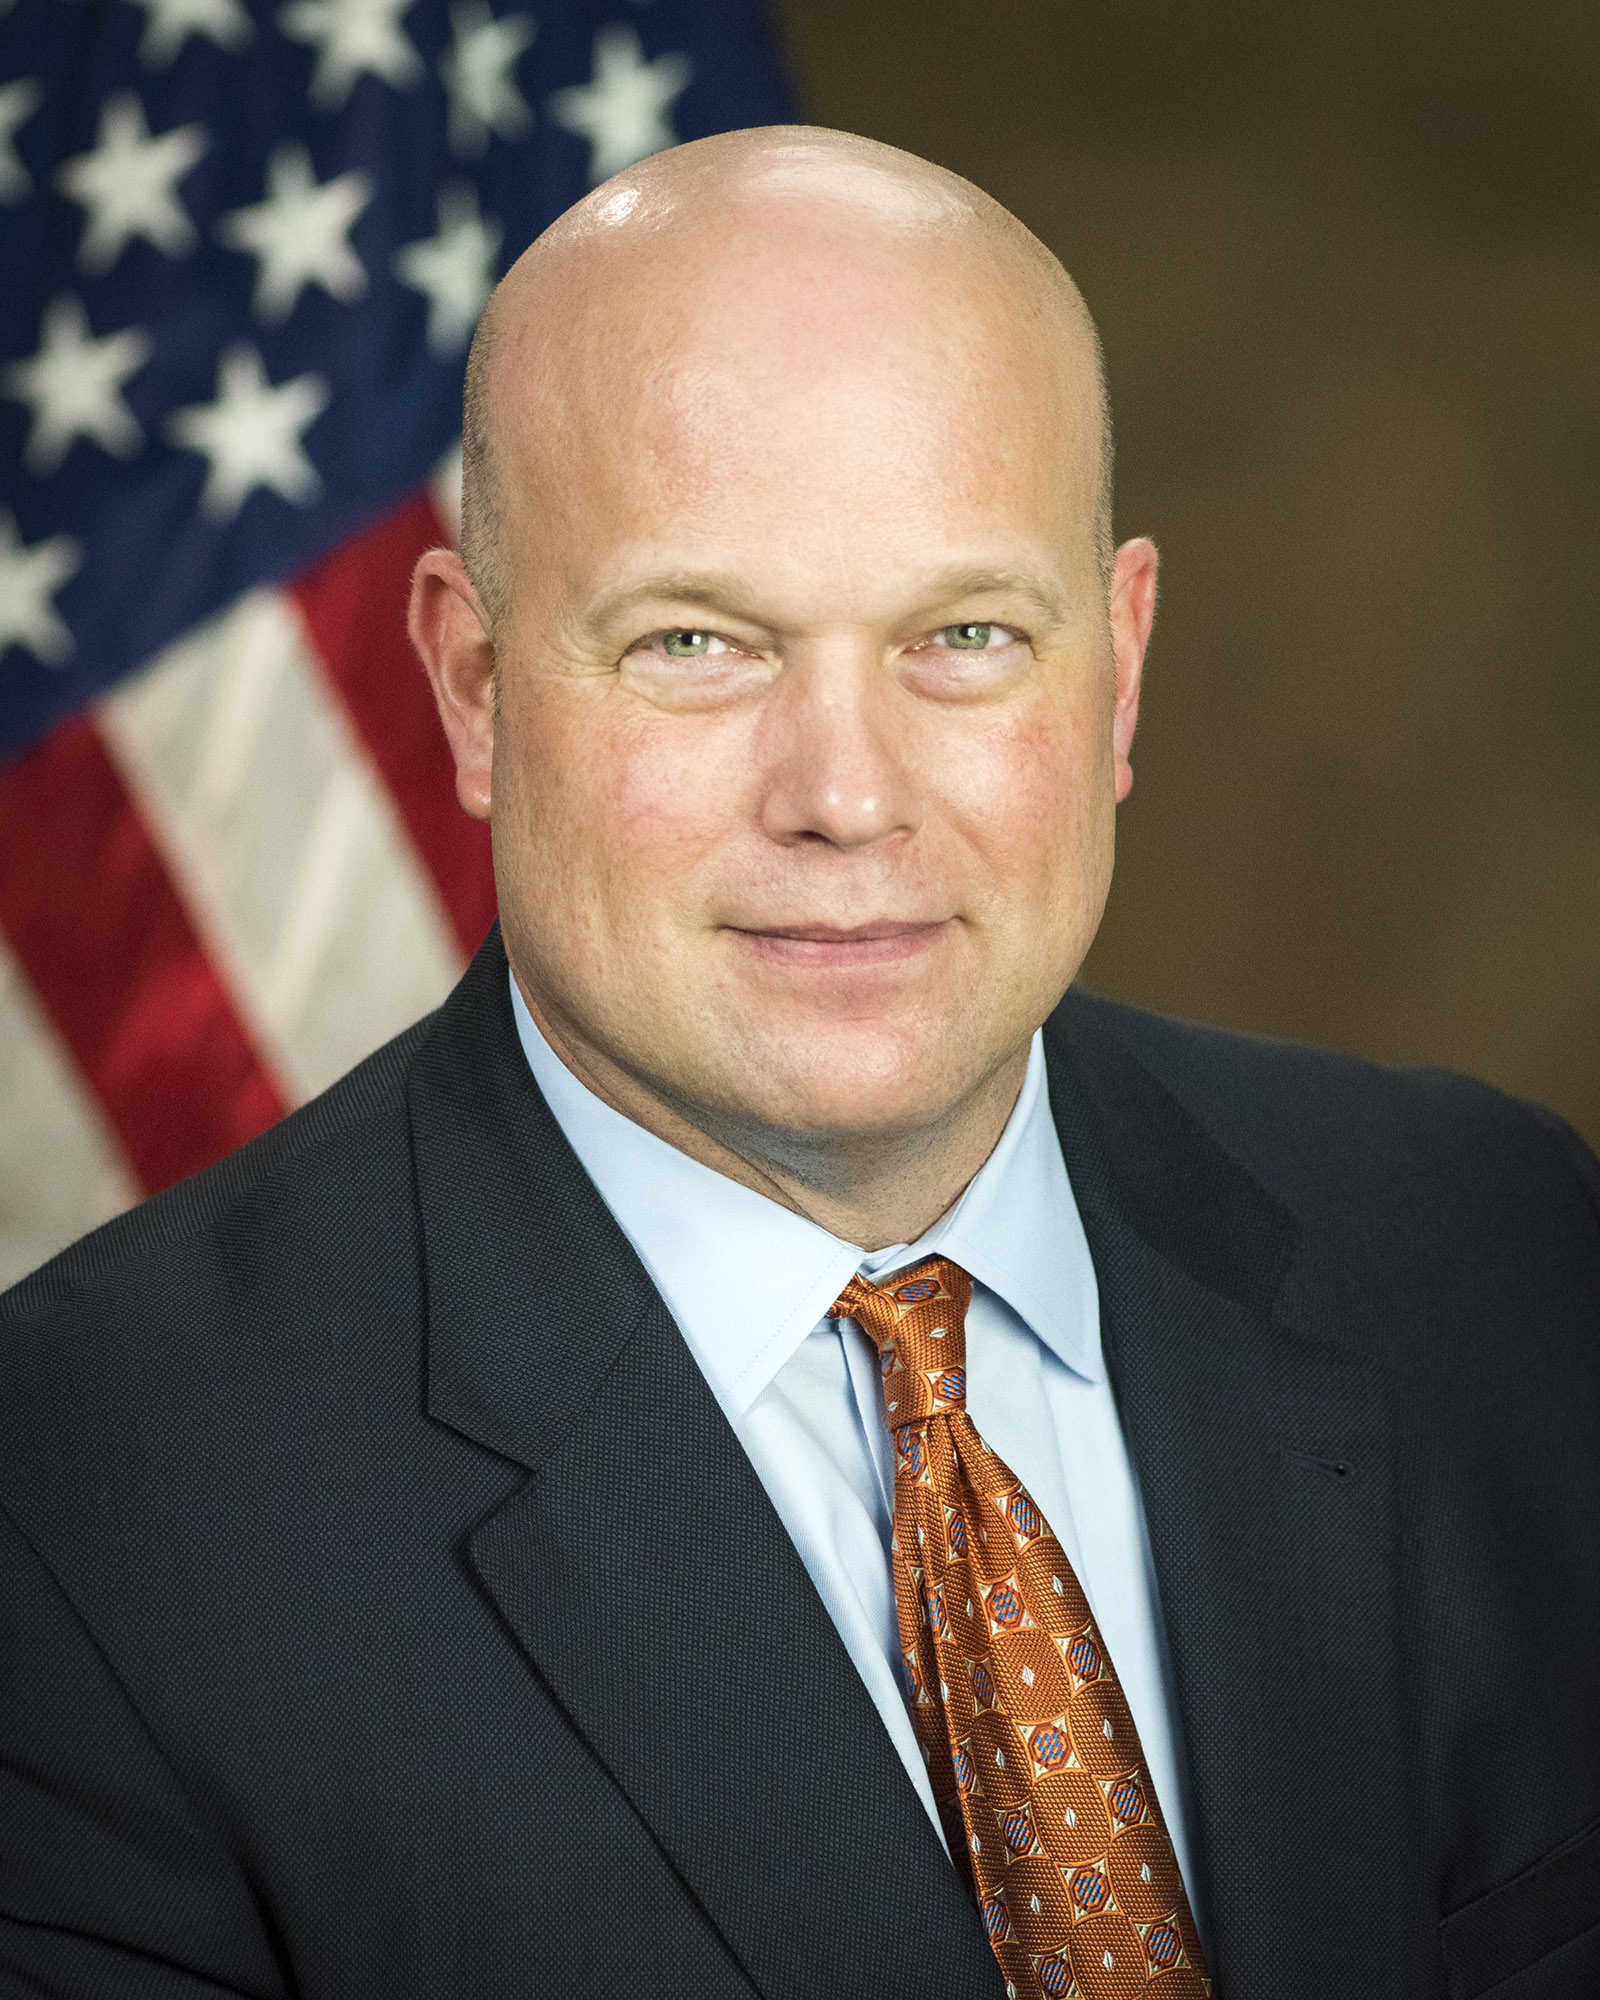 Acting AG Whitaker to testify before House panel on Friday after subpoena threat